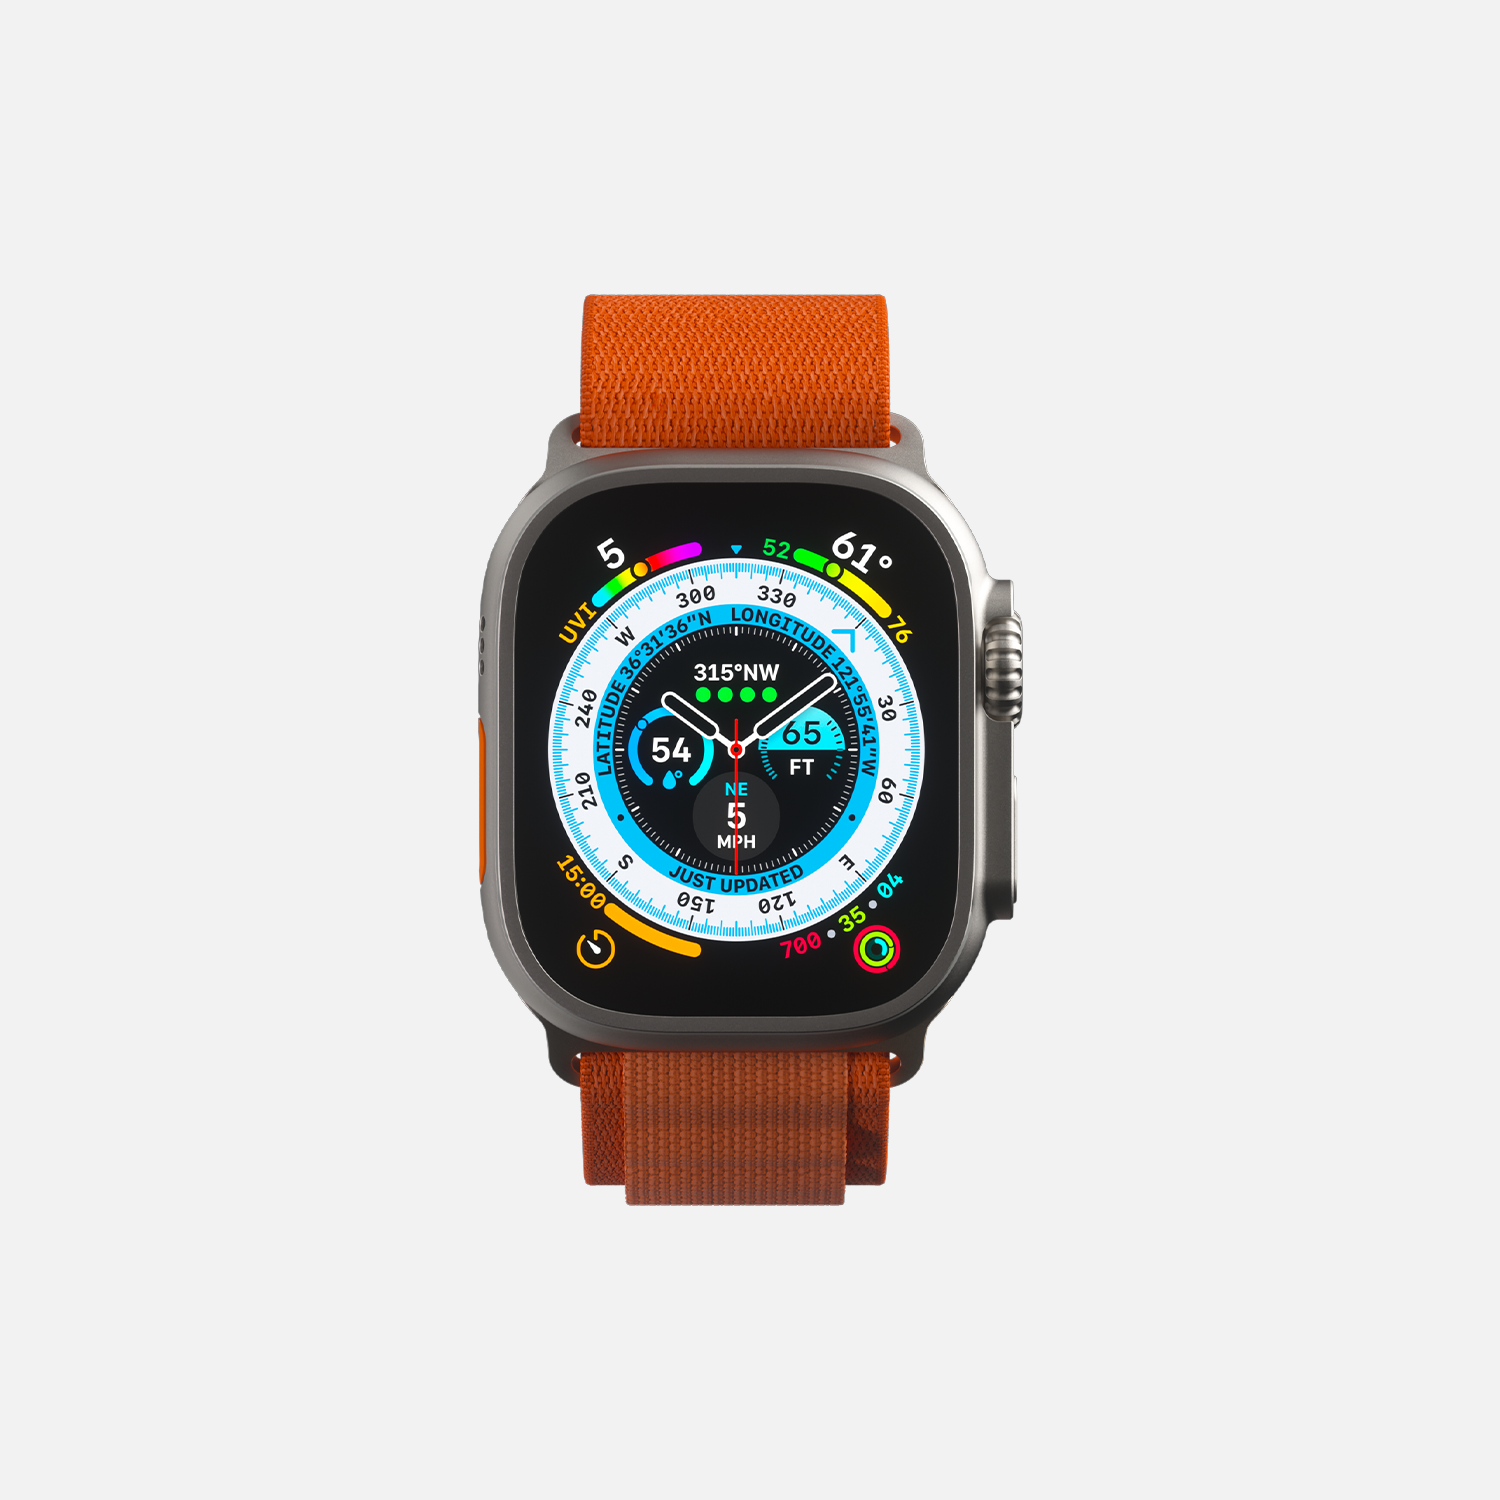 Smartwatch with orange strap and colorful analog-digital watch face displaying compass and altitude.